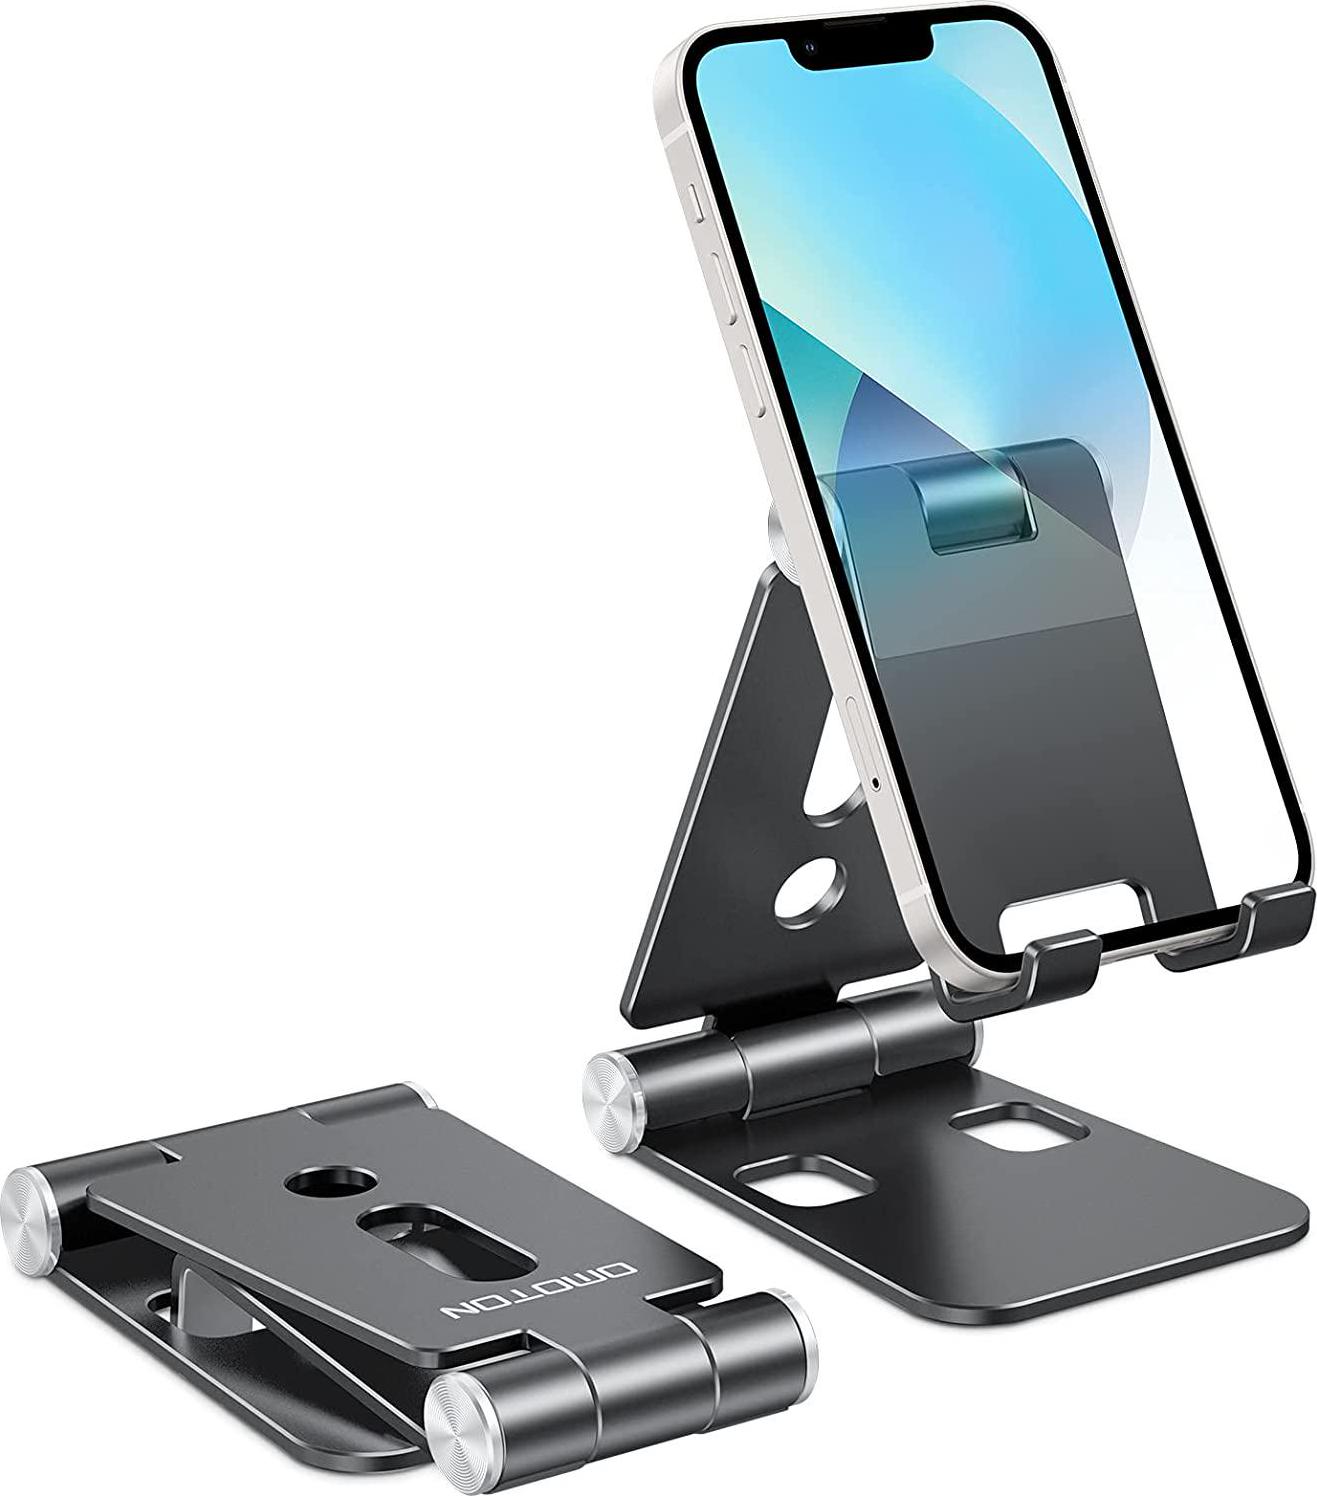 OMOTON, Foldable Cell Phone Stand, OMOTON C4 Portable Aluminum Phone Holder, Adjustable Phone Dock Cradle Compatible with Tablet (7.9-11 ), Ebook Reader and Smart Phones, Black